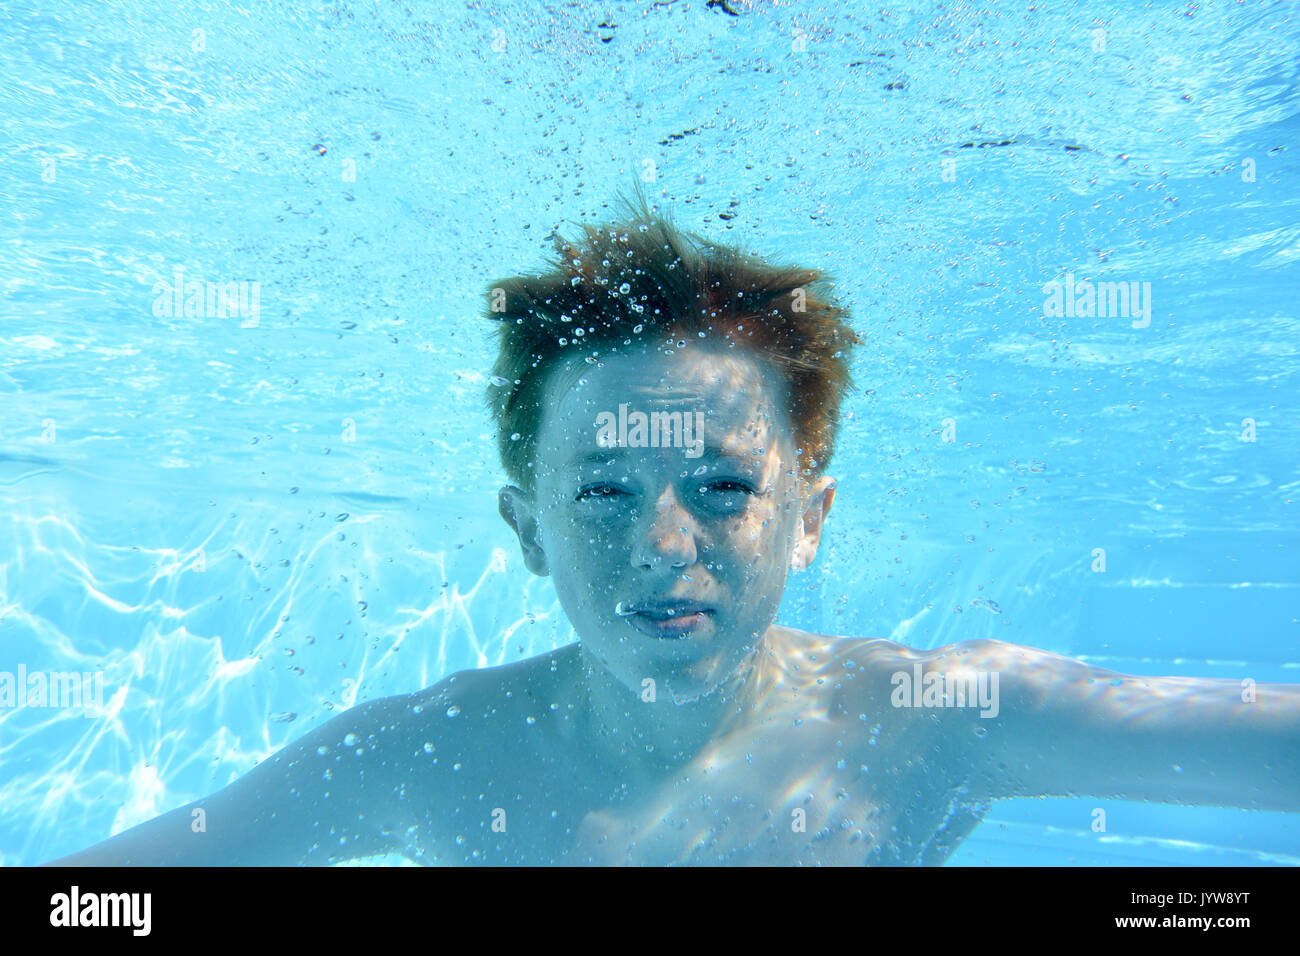 Auburn haired teenage boy, underwater in a swimming pool, looking into camera Stock Photo